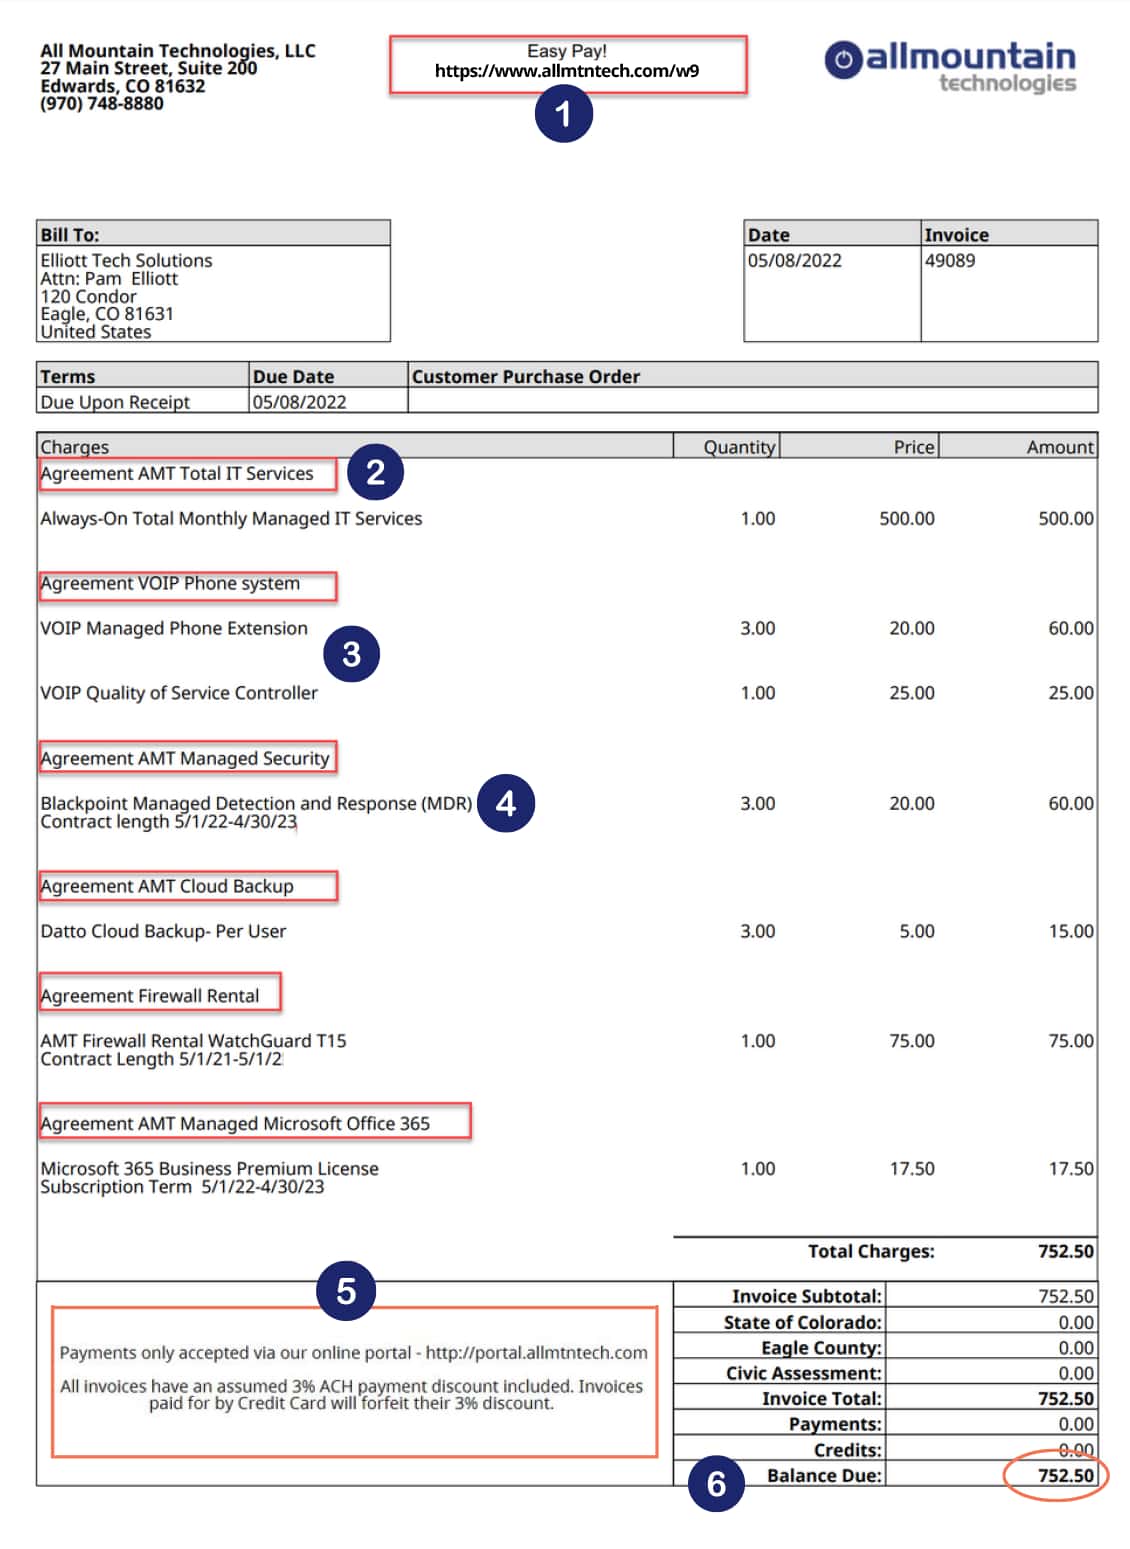 Understanding Your All Mountain Technologies Invoice